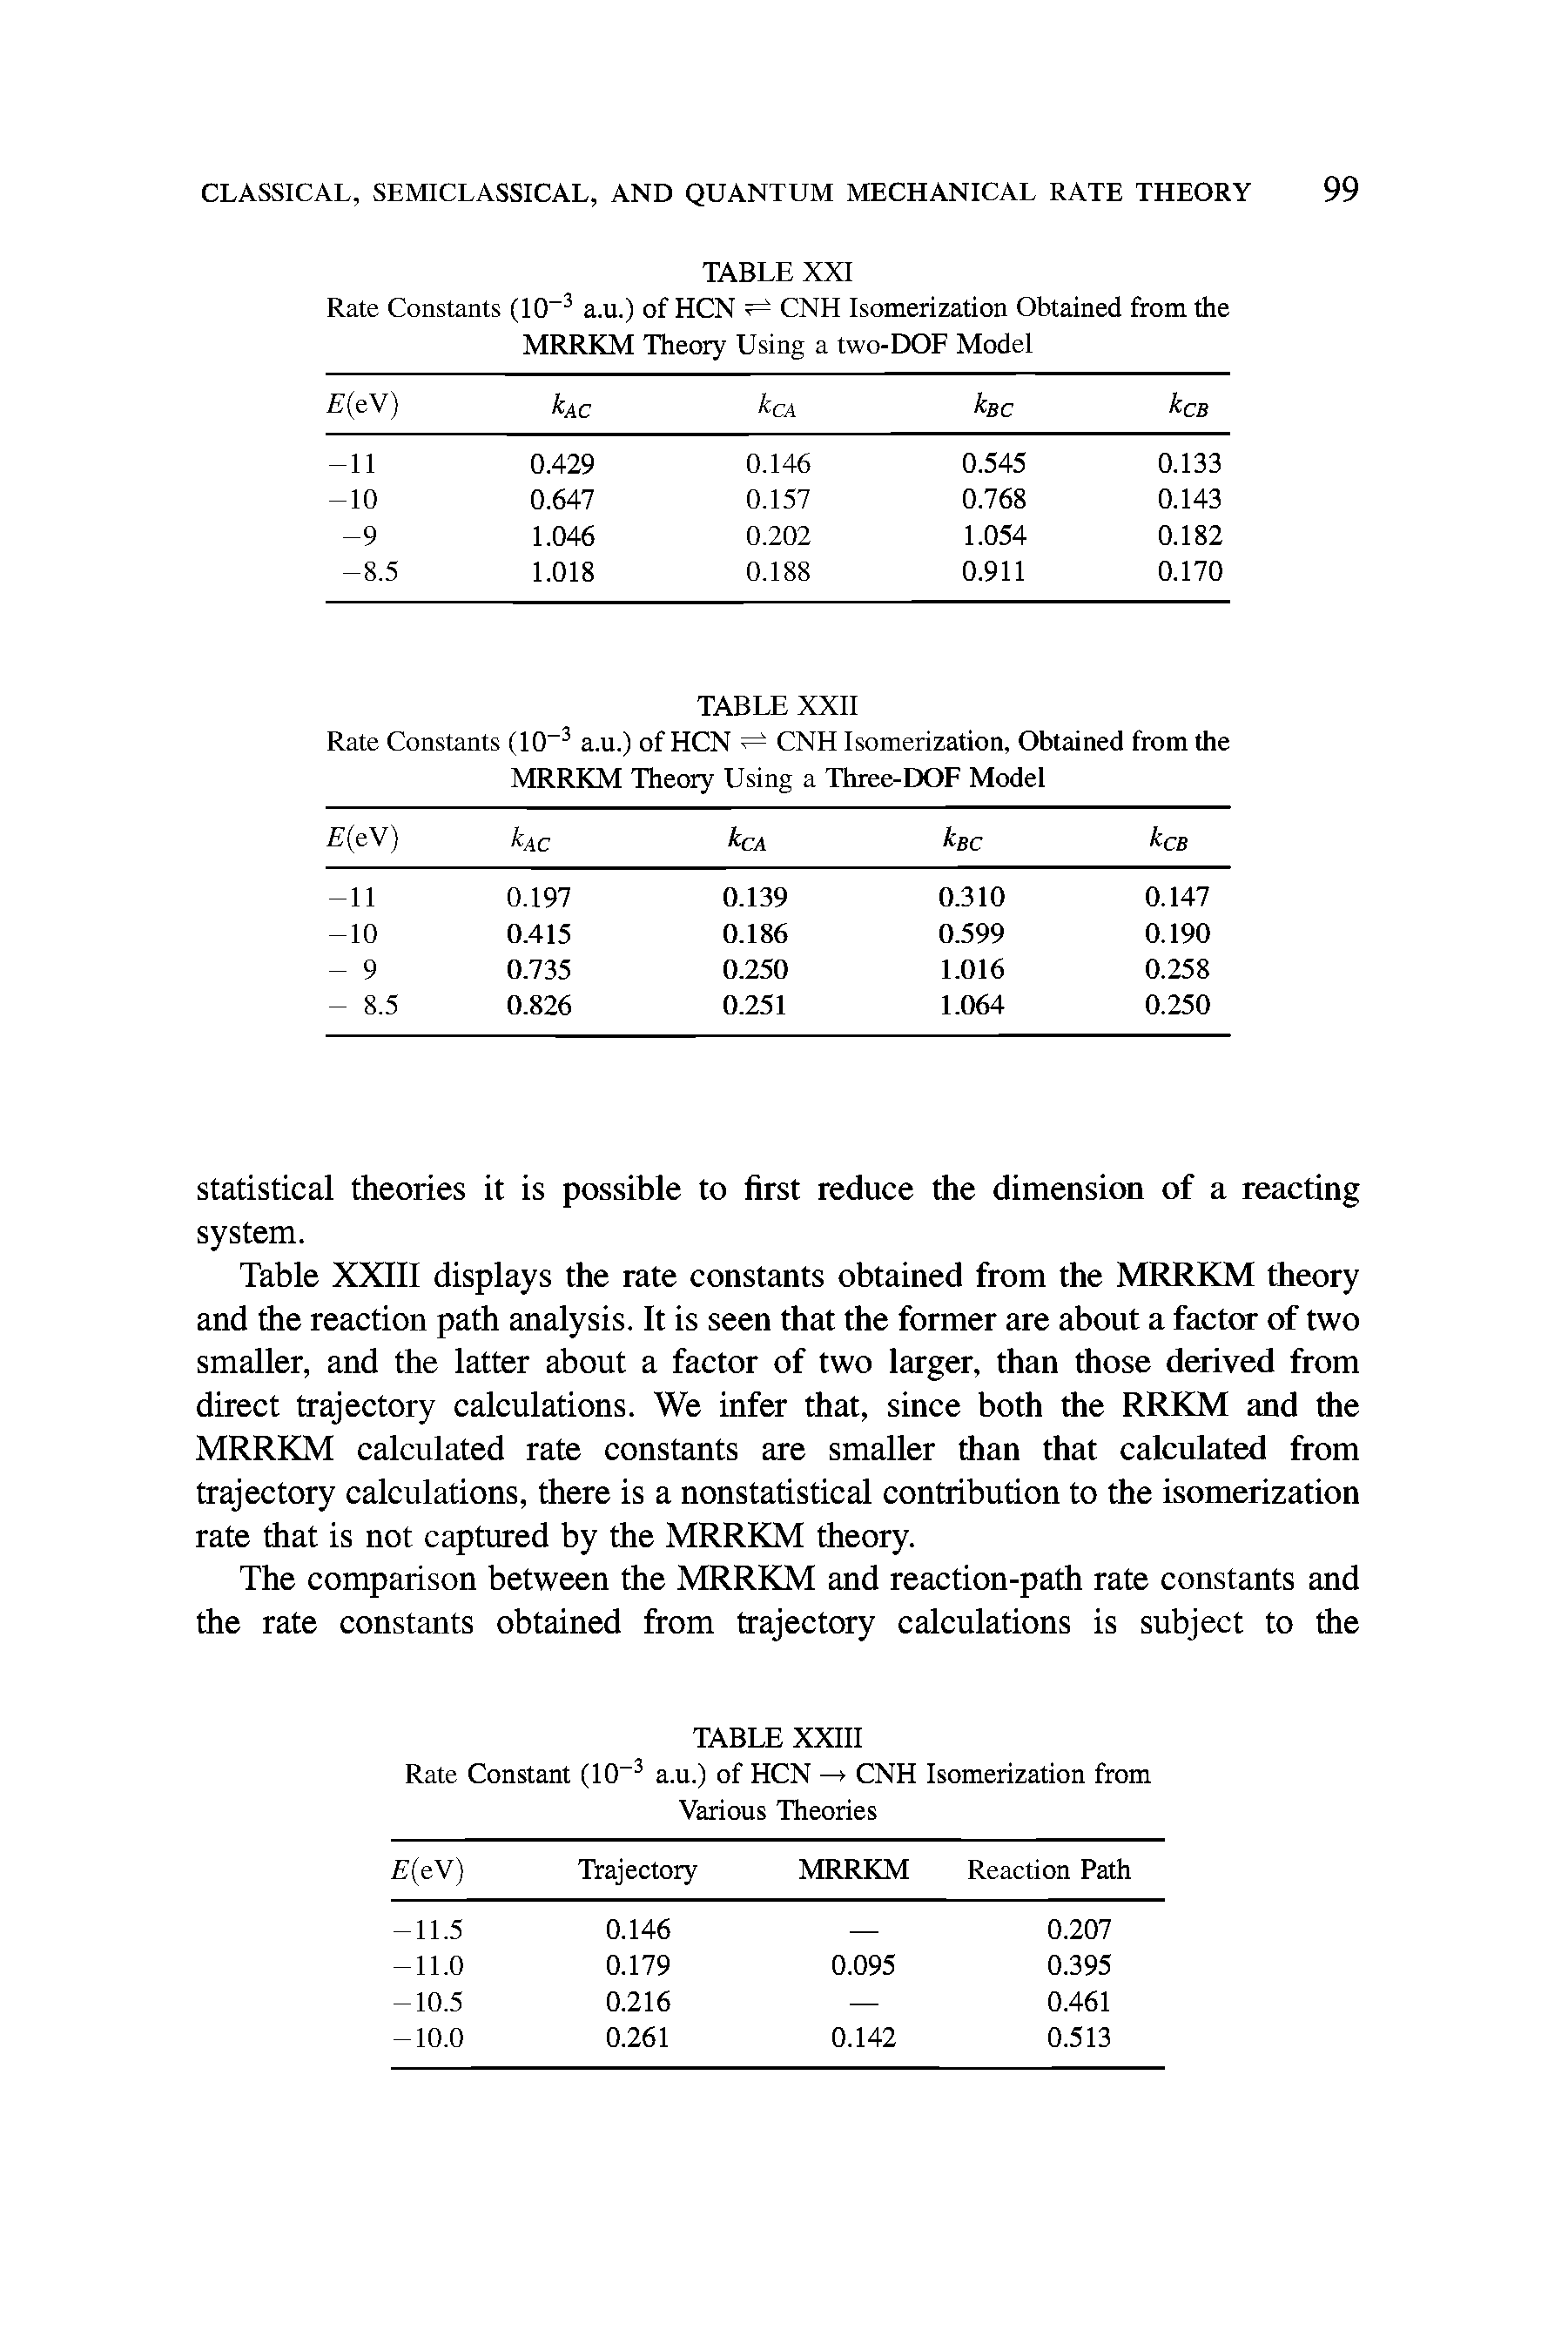 Table XXIII displays the rate constants obtained from the MRRKM theory and the reaction path analysis. It is seen that the former are about a factor of two smaller, and the latter about a factor of two larger, than those derived from direct trajectory calculations. We infer that, since both the RRKM and the MRRKM calculated rate constants are smaller than that calculated from trajectory calculations, there is a nonstatistical contribution to the isomerization rate that is not captured by the MRRKM theory.